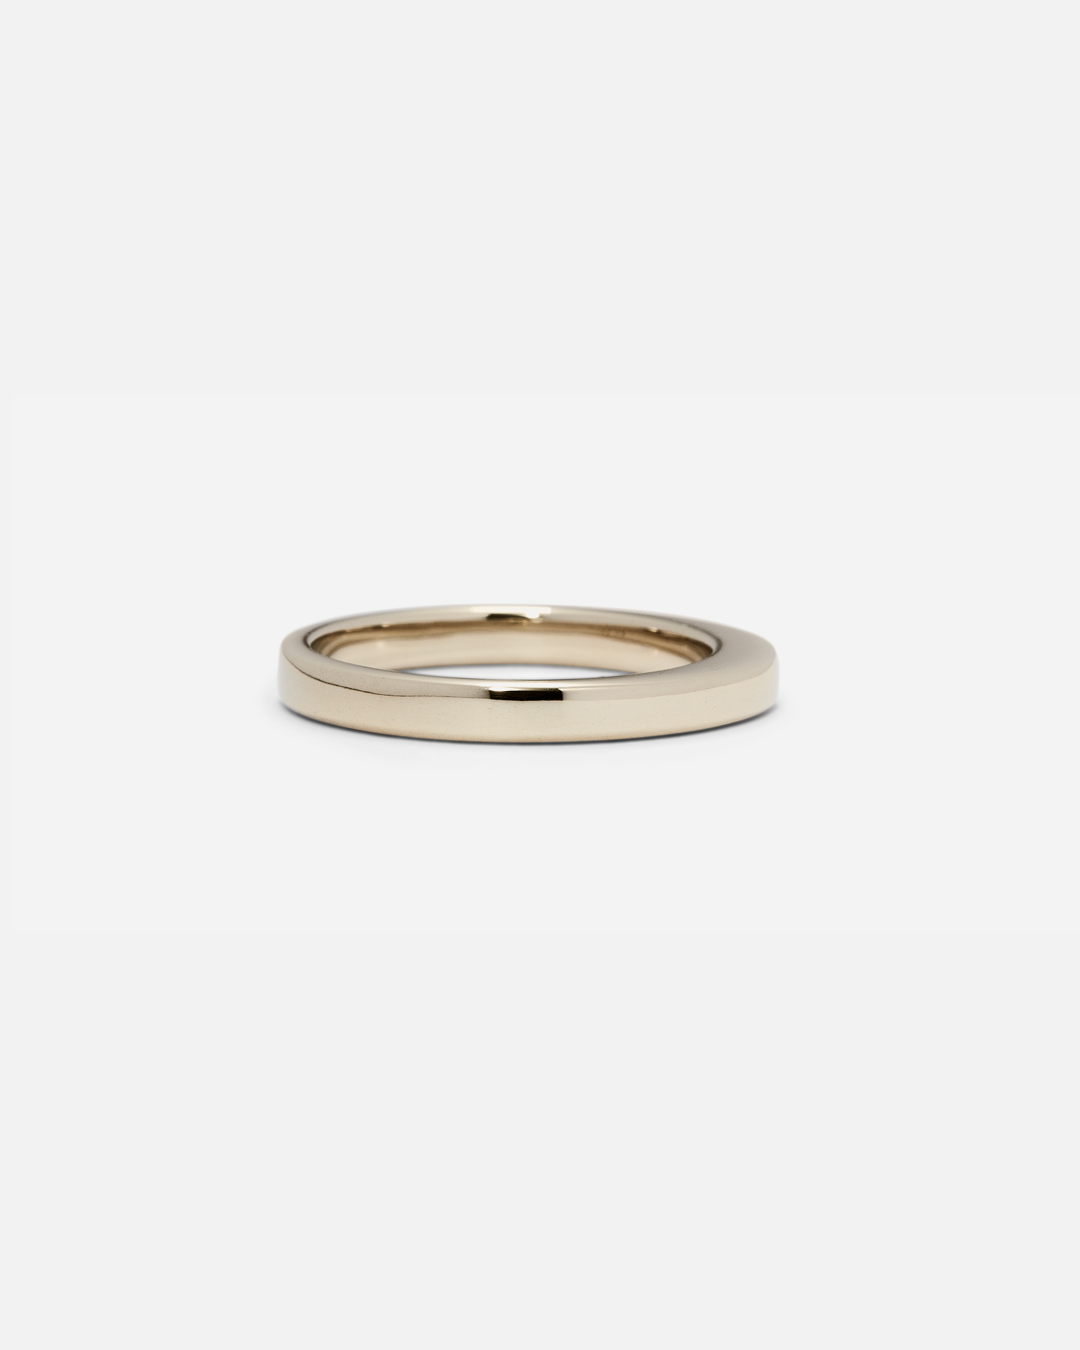 Orbit Band / Standard Large By Hiroyo in Wedding Bands Category